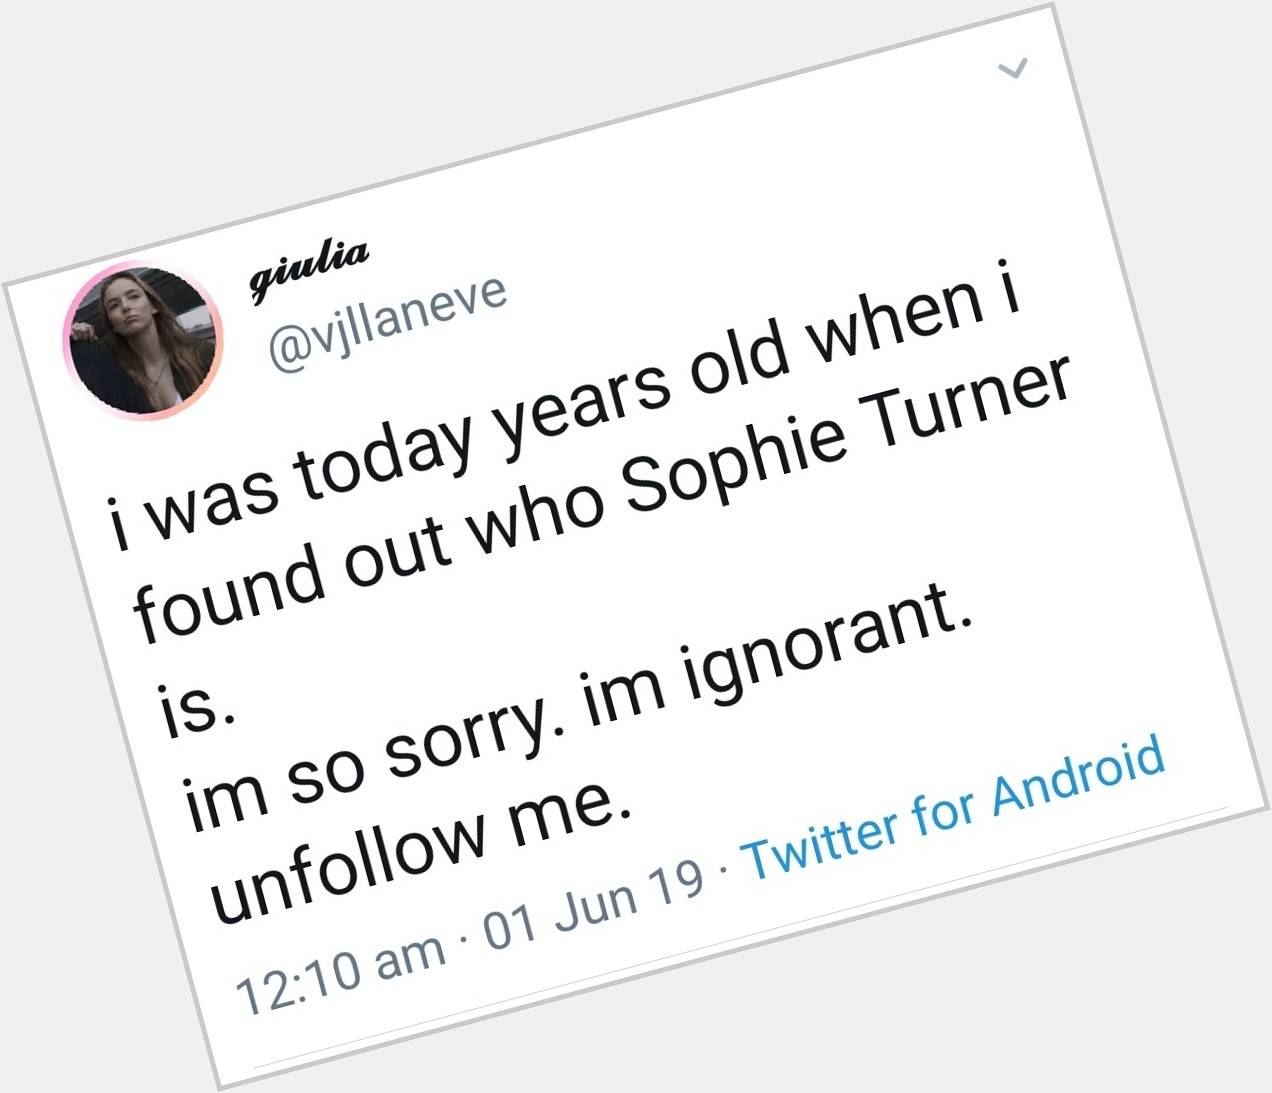 Happy almost first birthday to when i found out who Sophie Turner was 